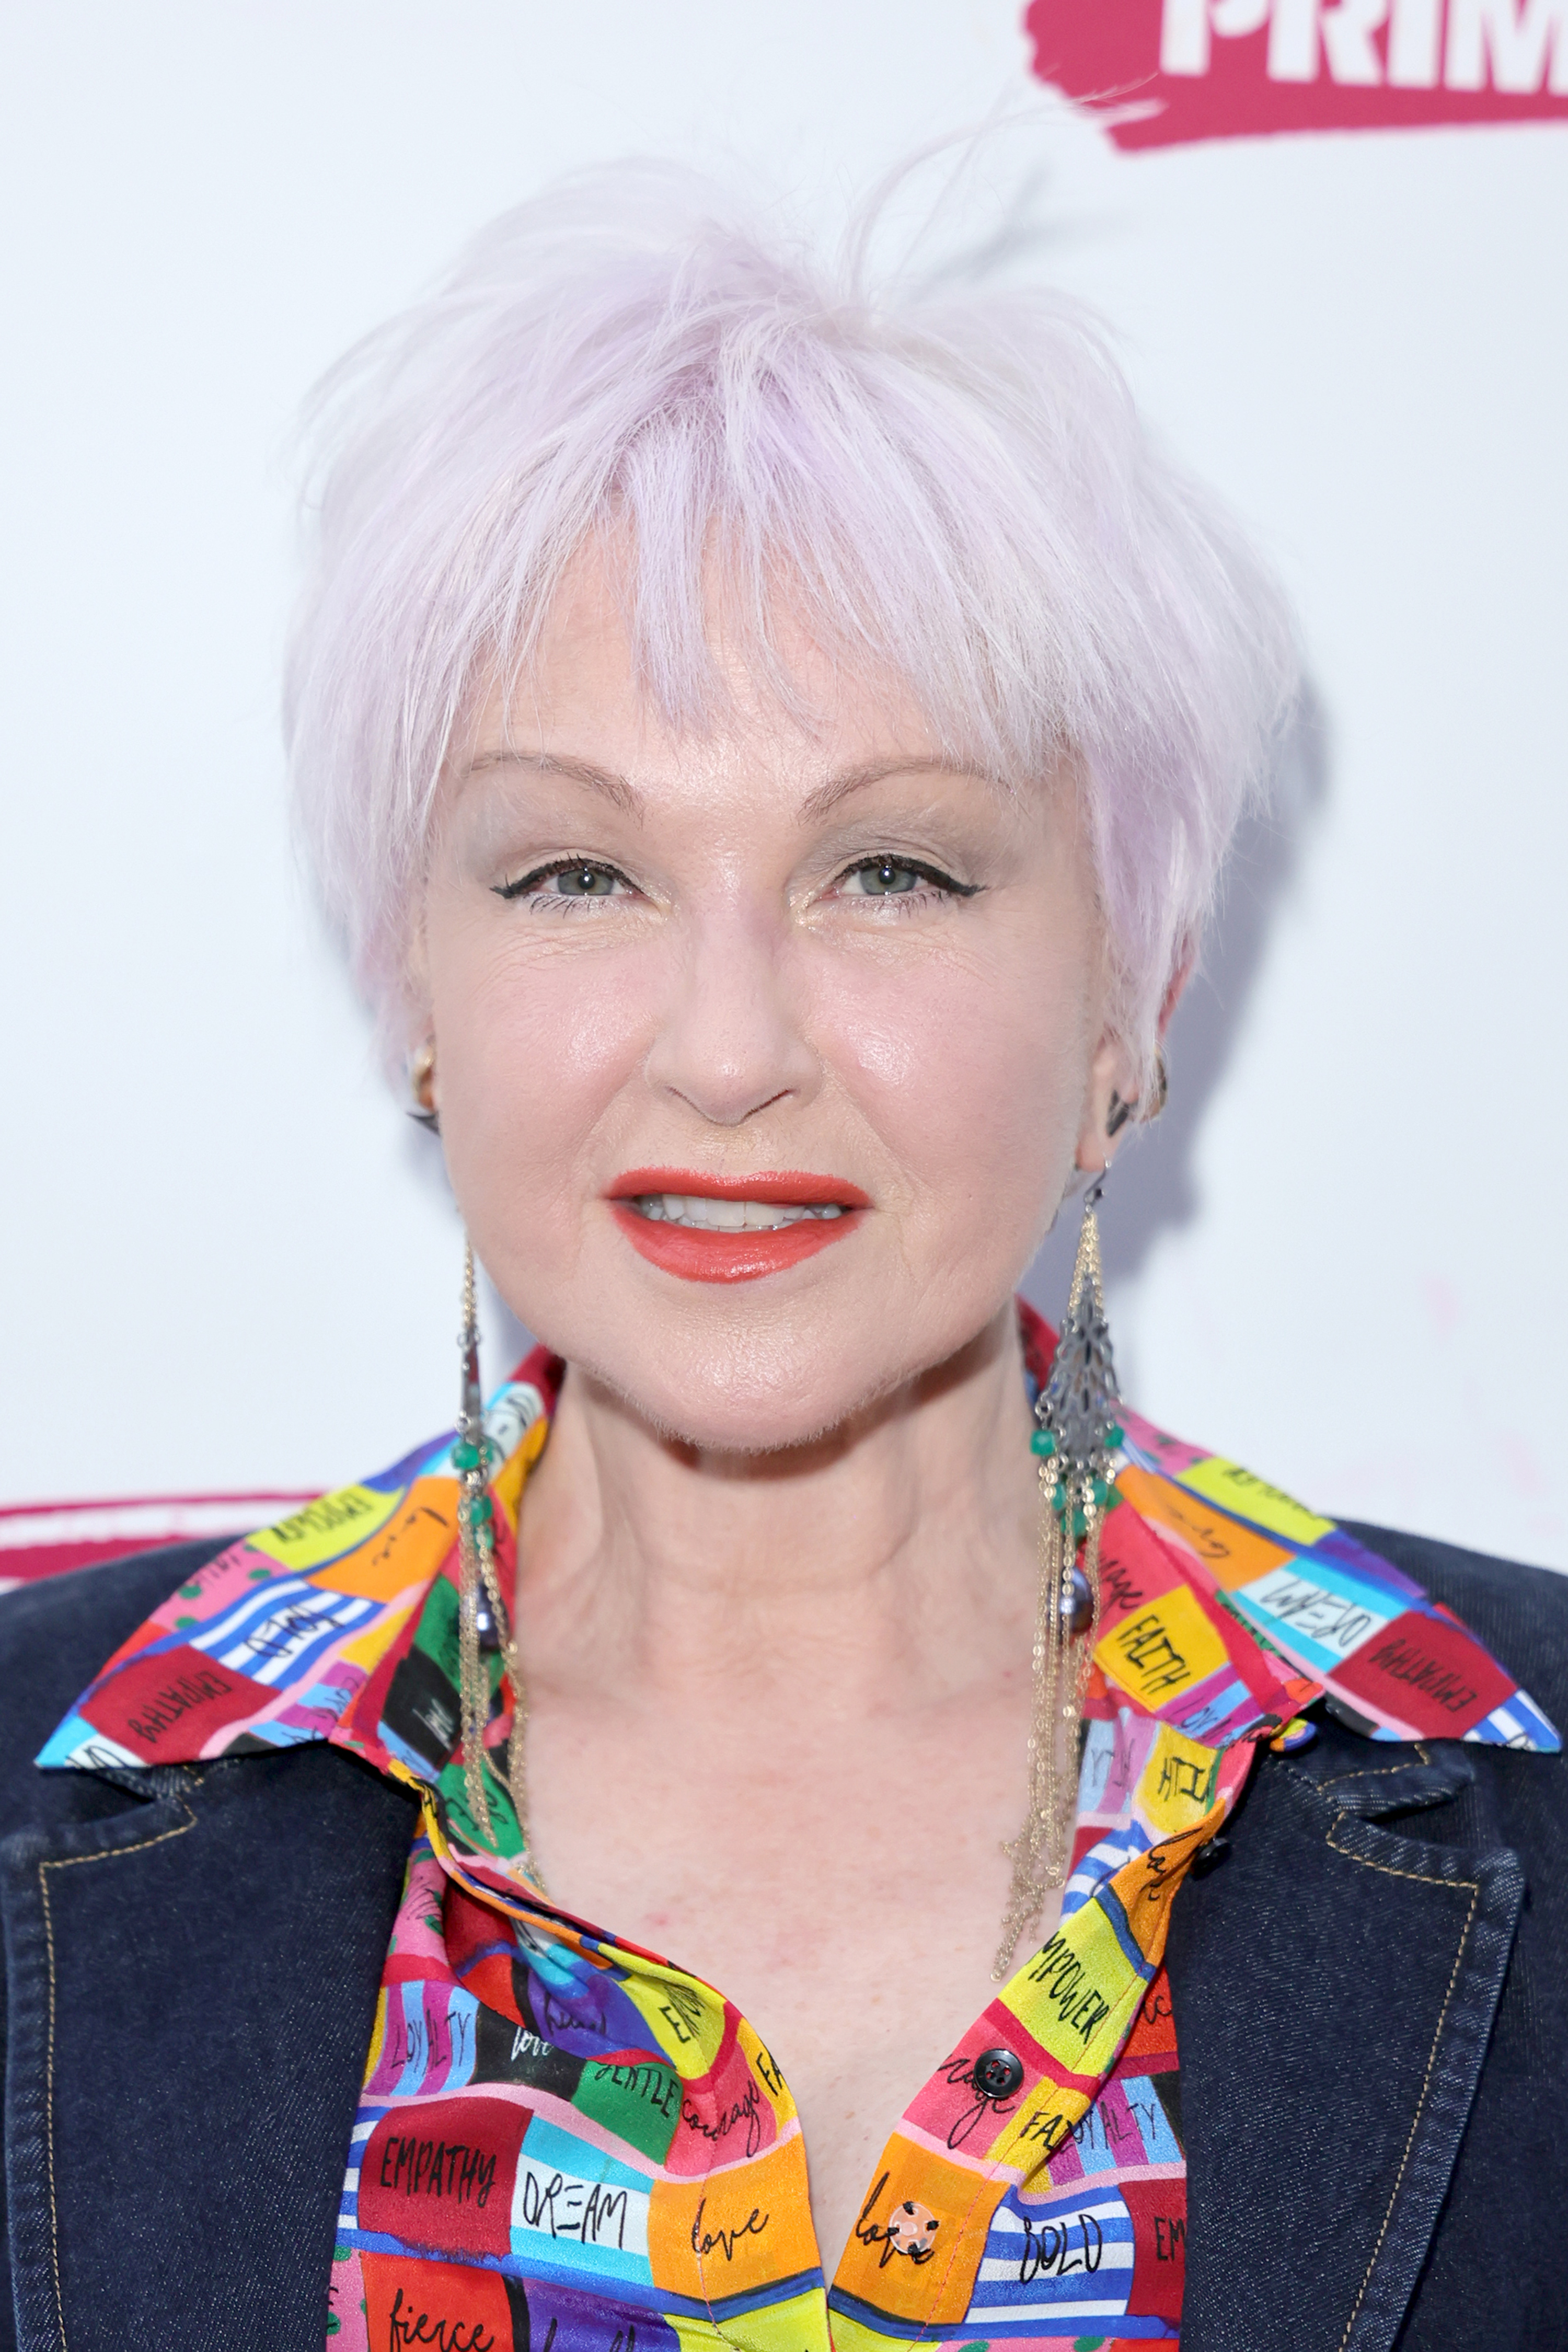 amanda bolte recommends naked pictures of cyndi lauper pic